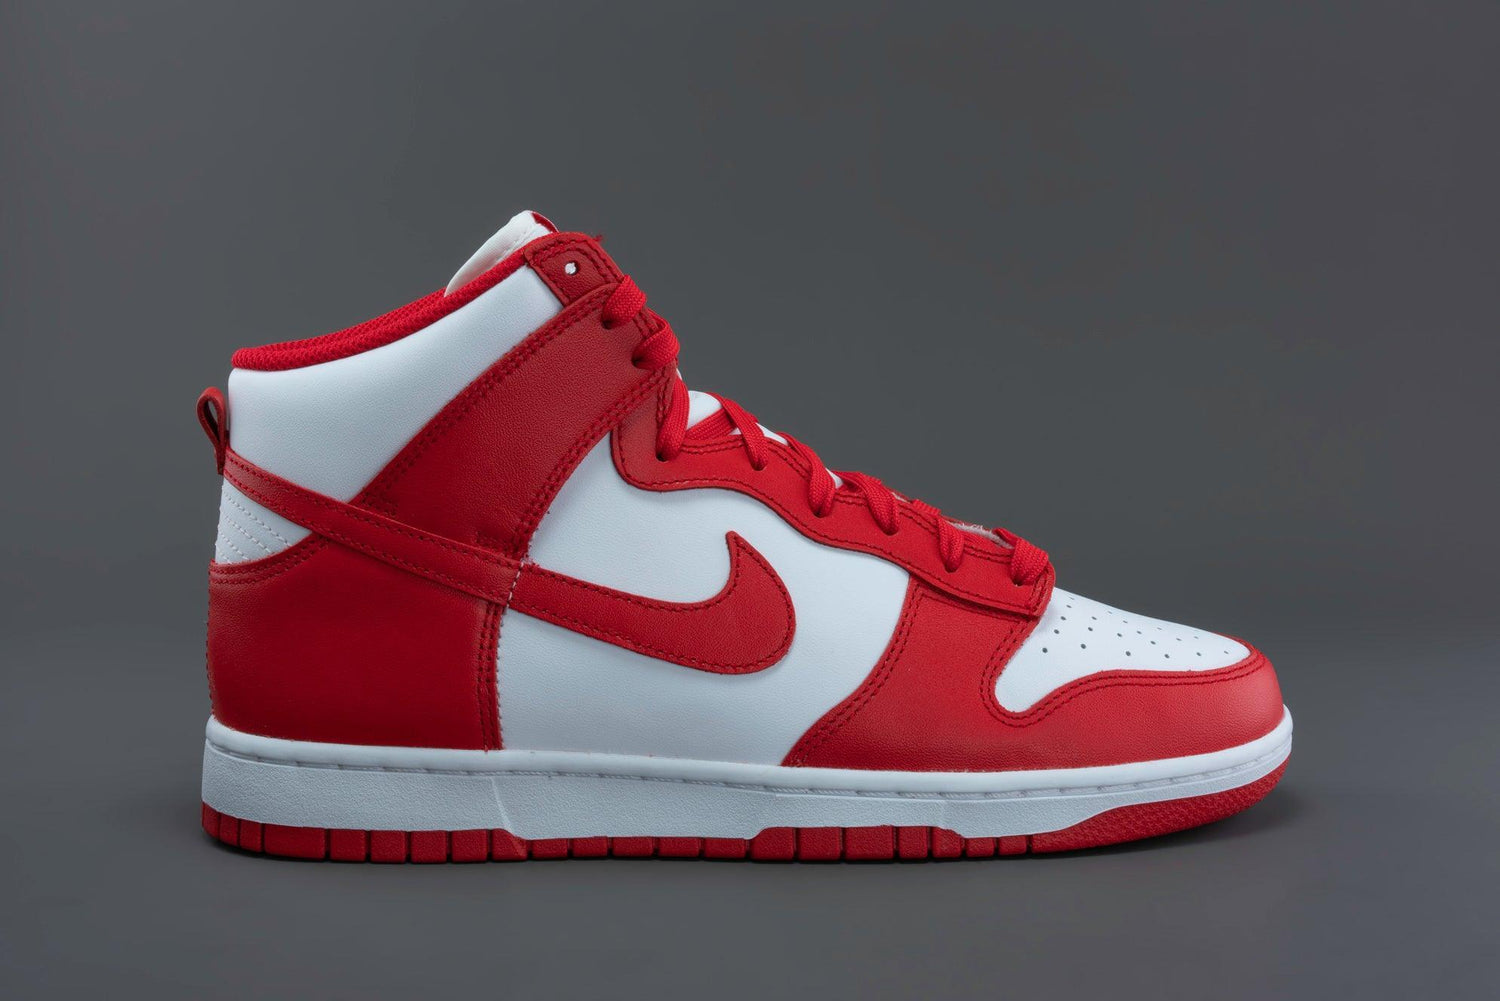 Nike Dunk High ChampionshipWhite and Red